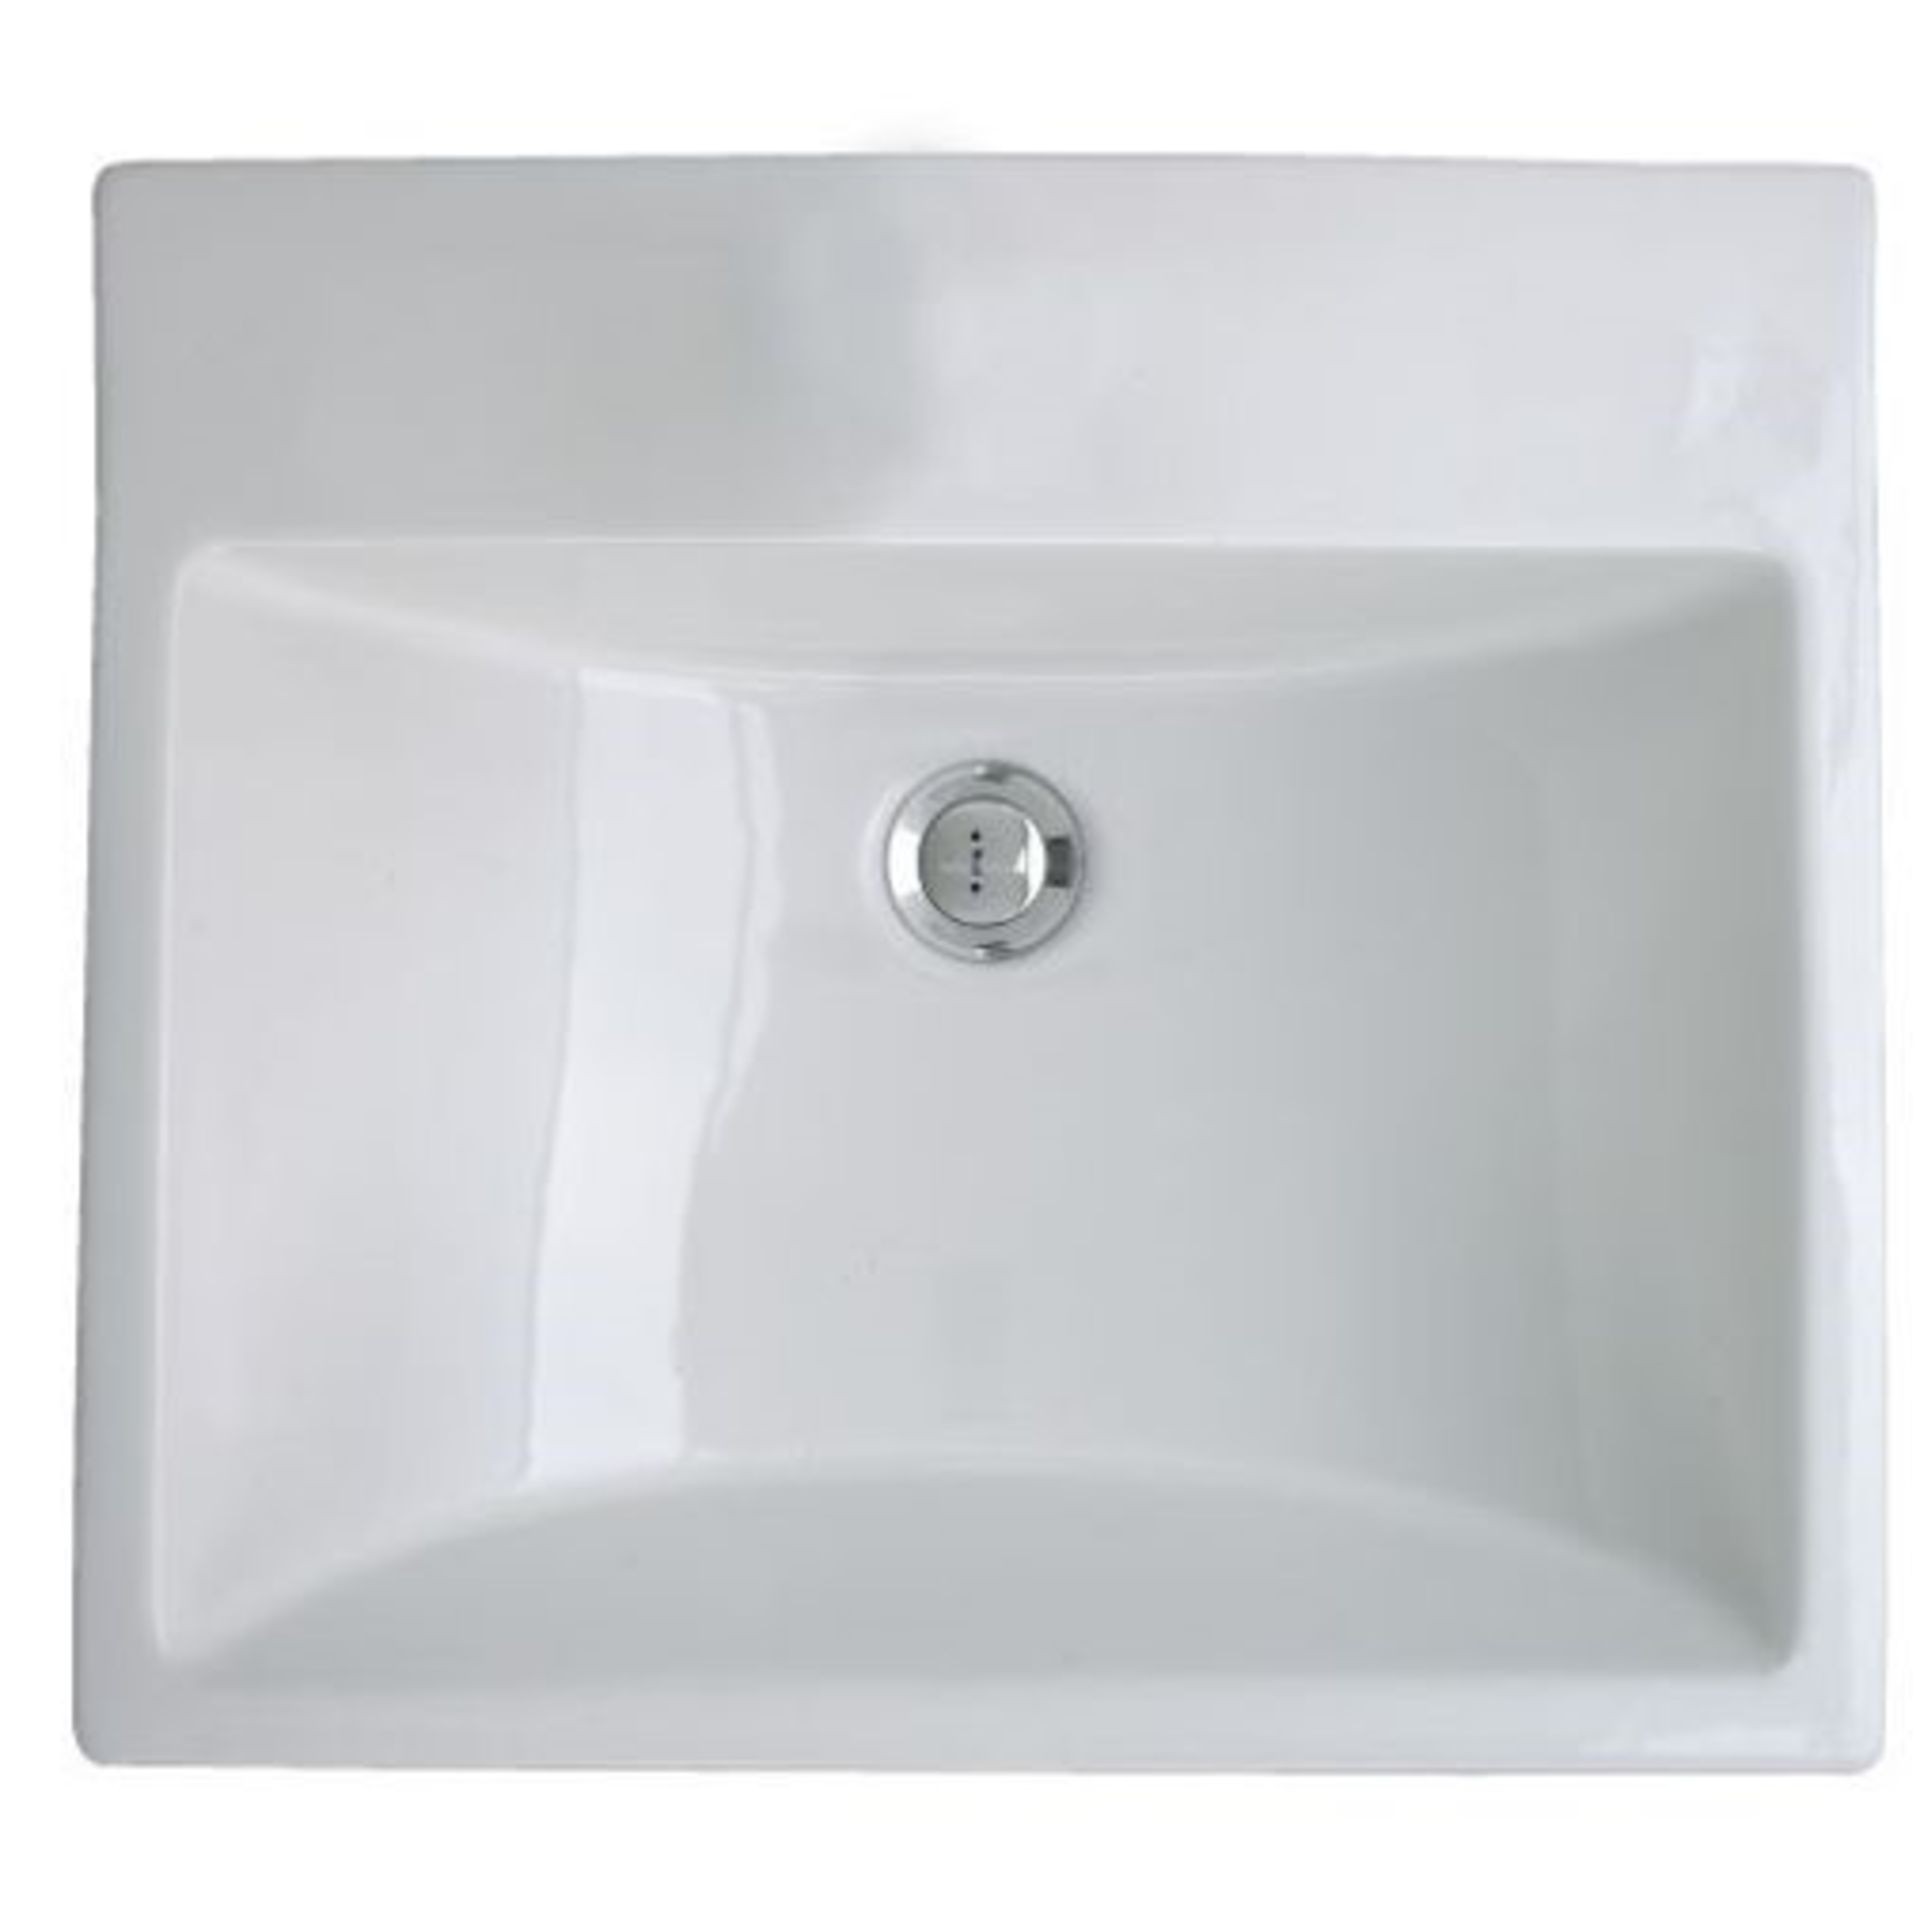 EURO 500mm DESIGNER BASIN WITH PEDESTAL. CAN BE WALL OR PEDESTAL MOUNTED. RRP £395. BRAND NEW, BOXED - Image 3 of 4